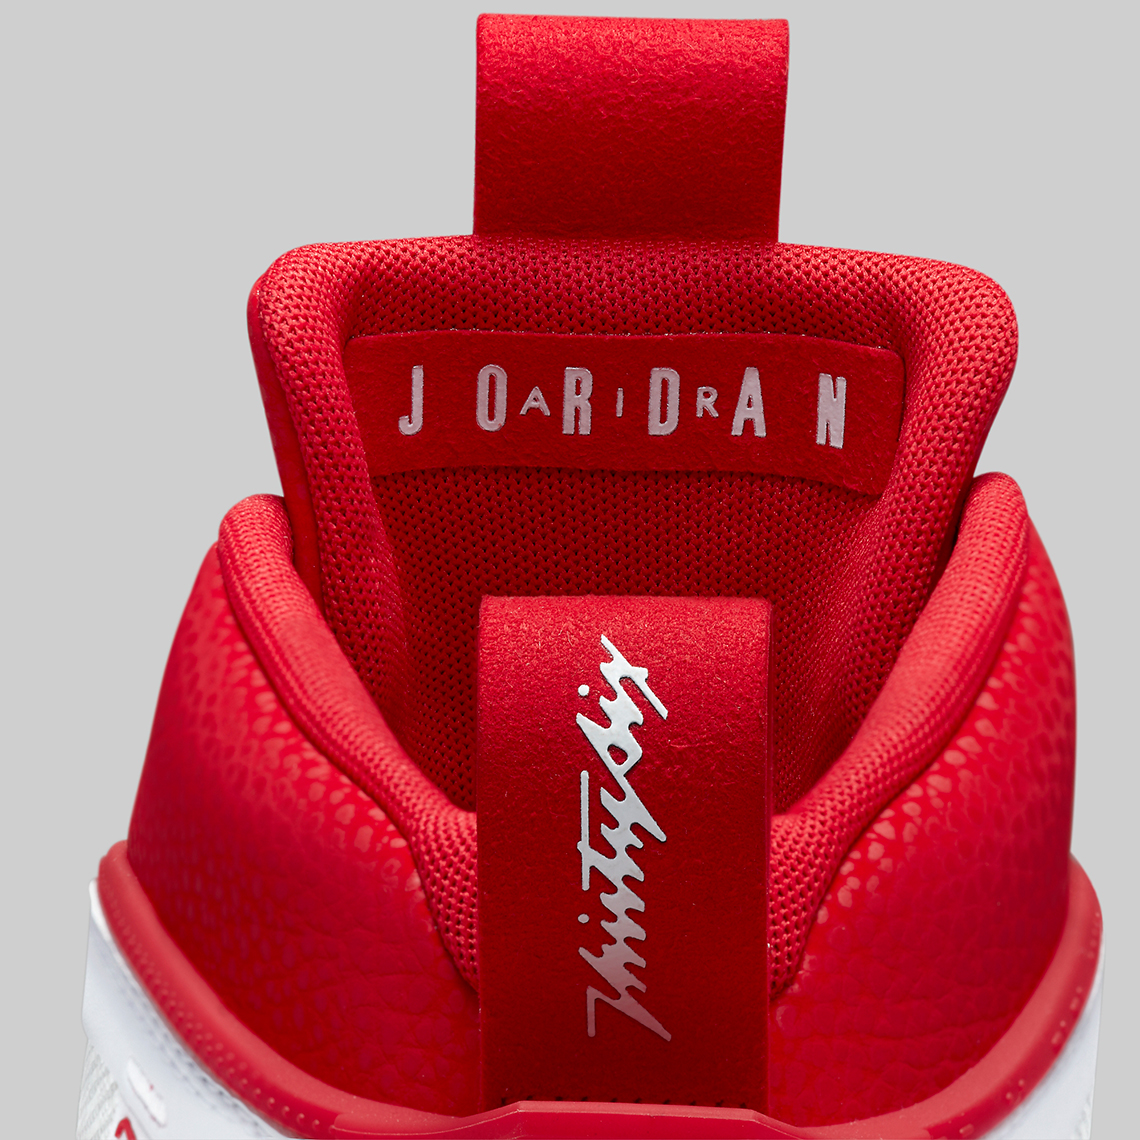 Aleali May and Jordan los Brand Team Up on a Special New Jordan los 1 For Women